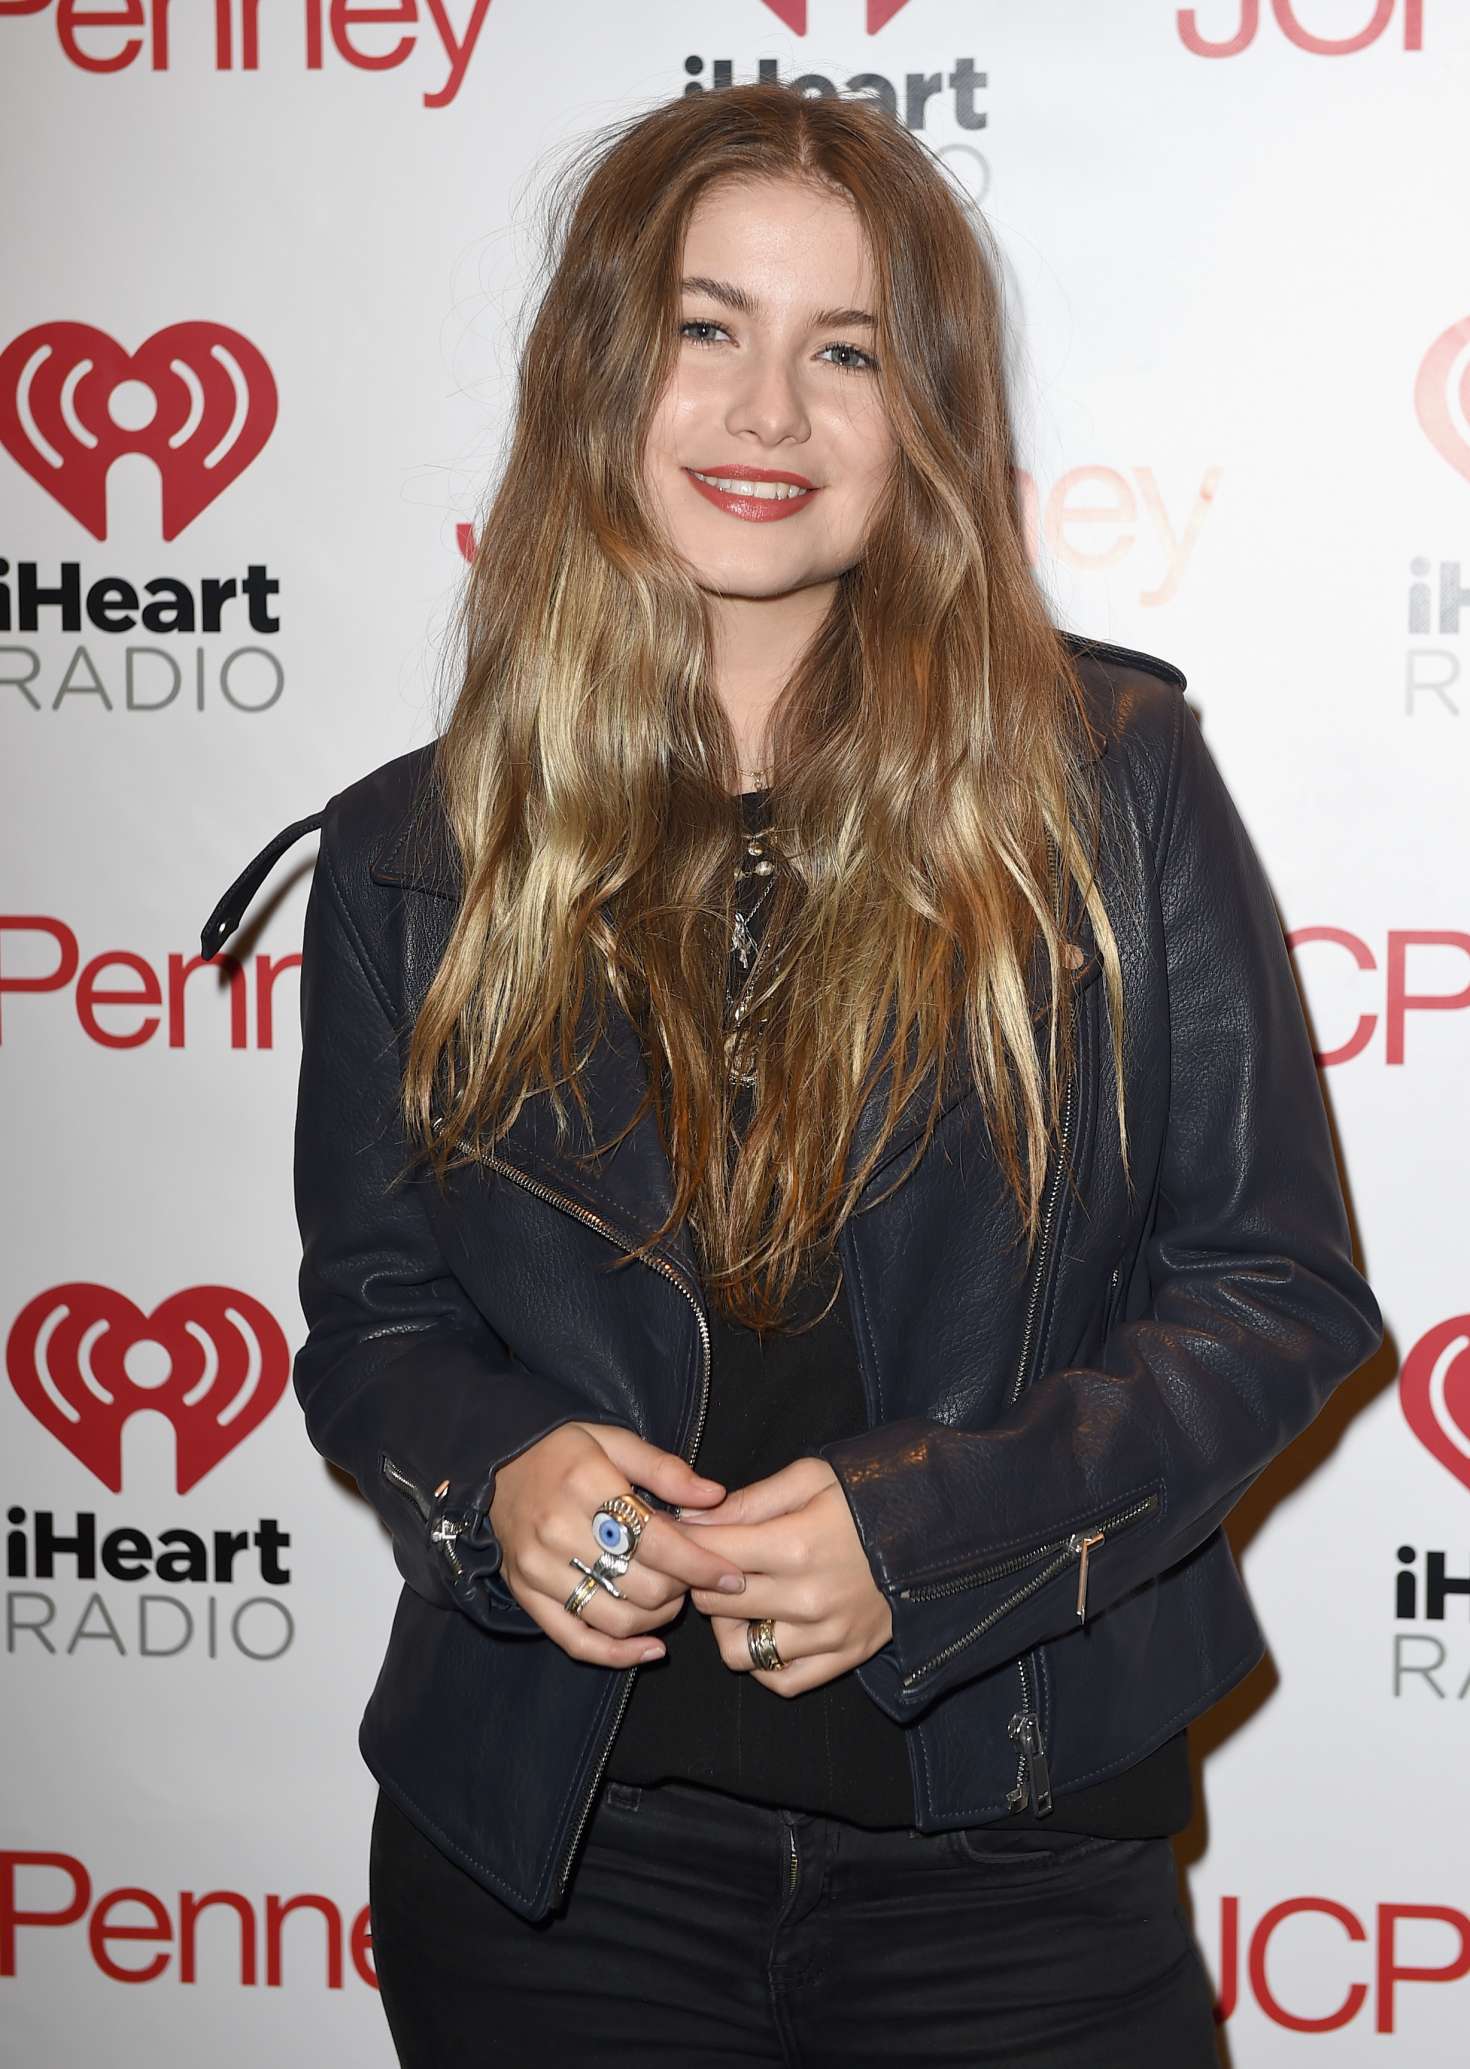 Sofia Reyes - iHeartRadio Mi Musica with Becky G in Burbank